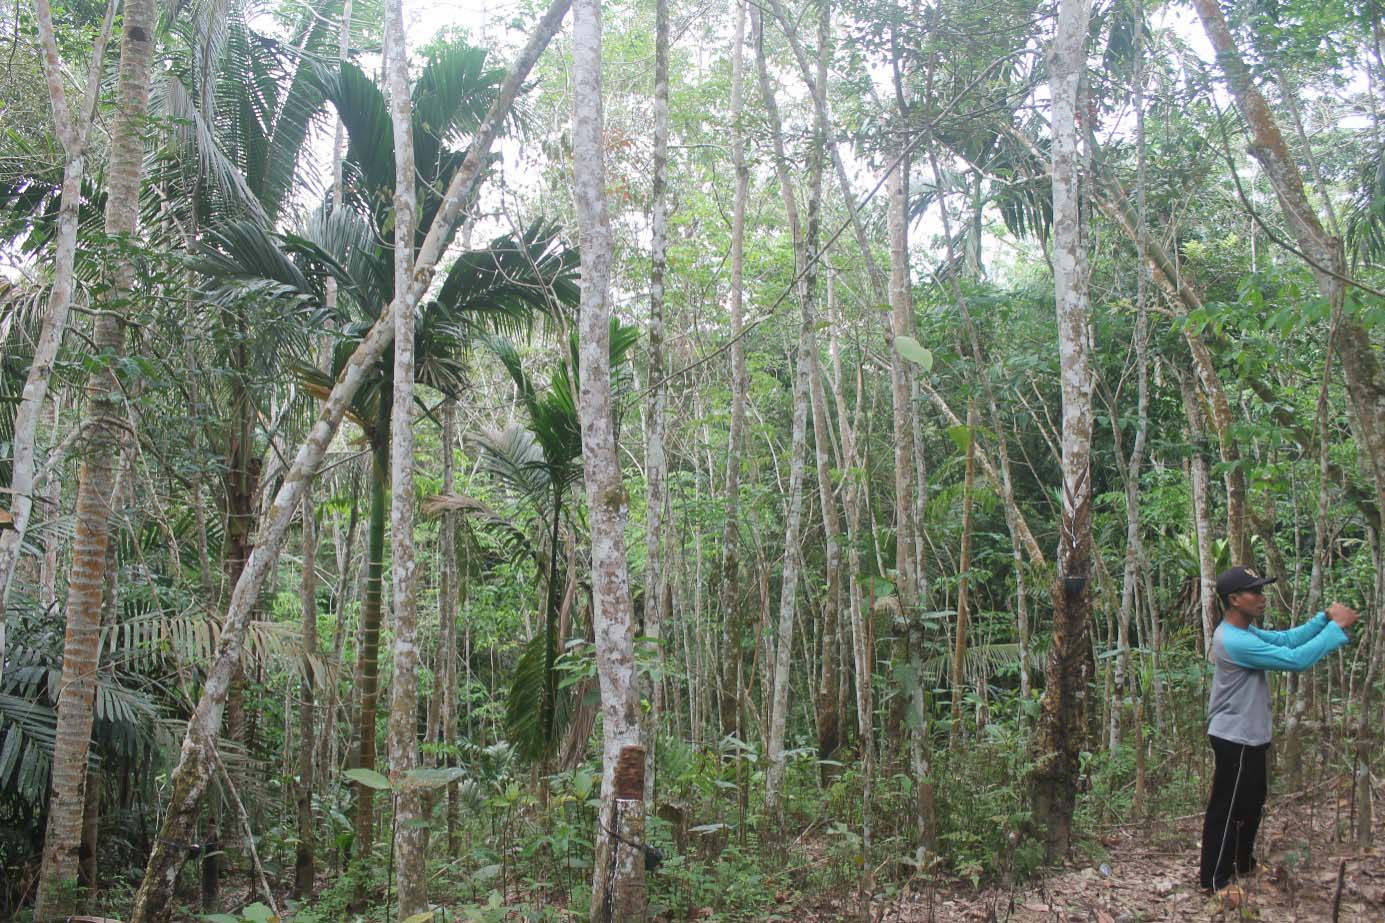 Photo of a forest. Palm trees and tree trunks, on the right a man cutting the nut palm.